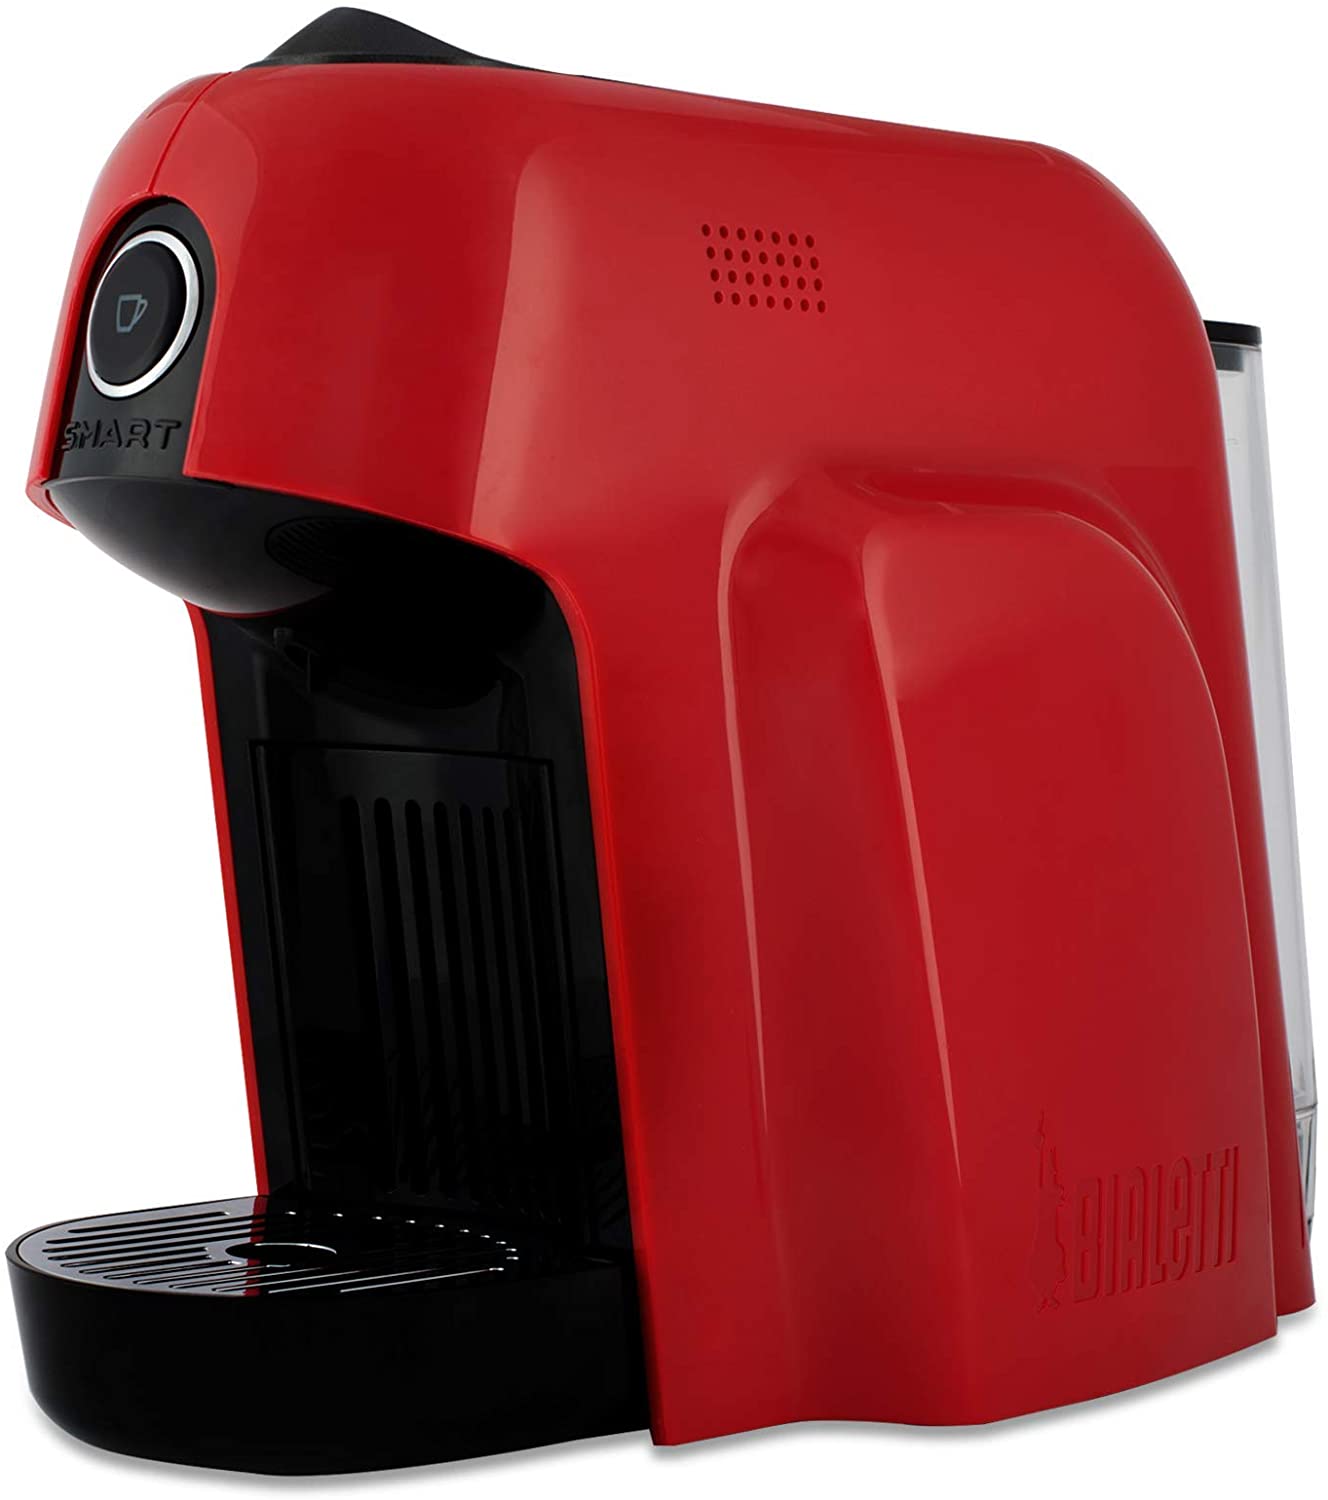 Coffee Machine Smart Red Capsules Caffe Bialetti CF65 Tisante Ginseng